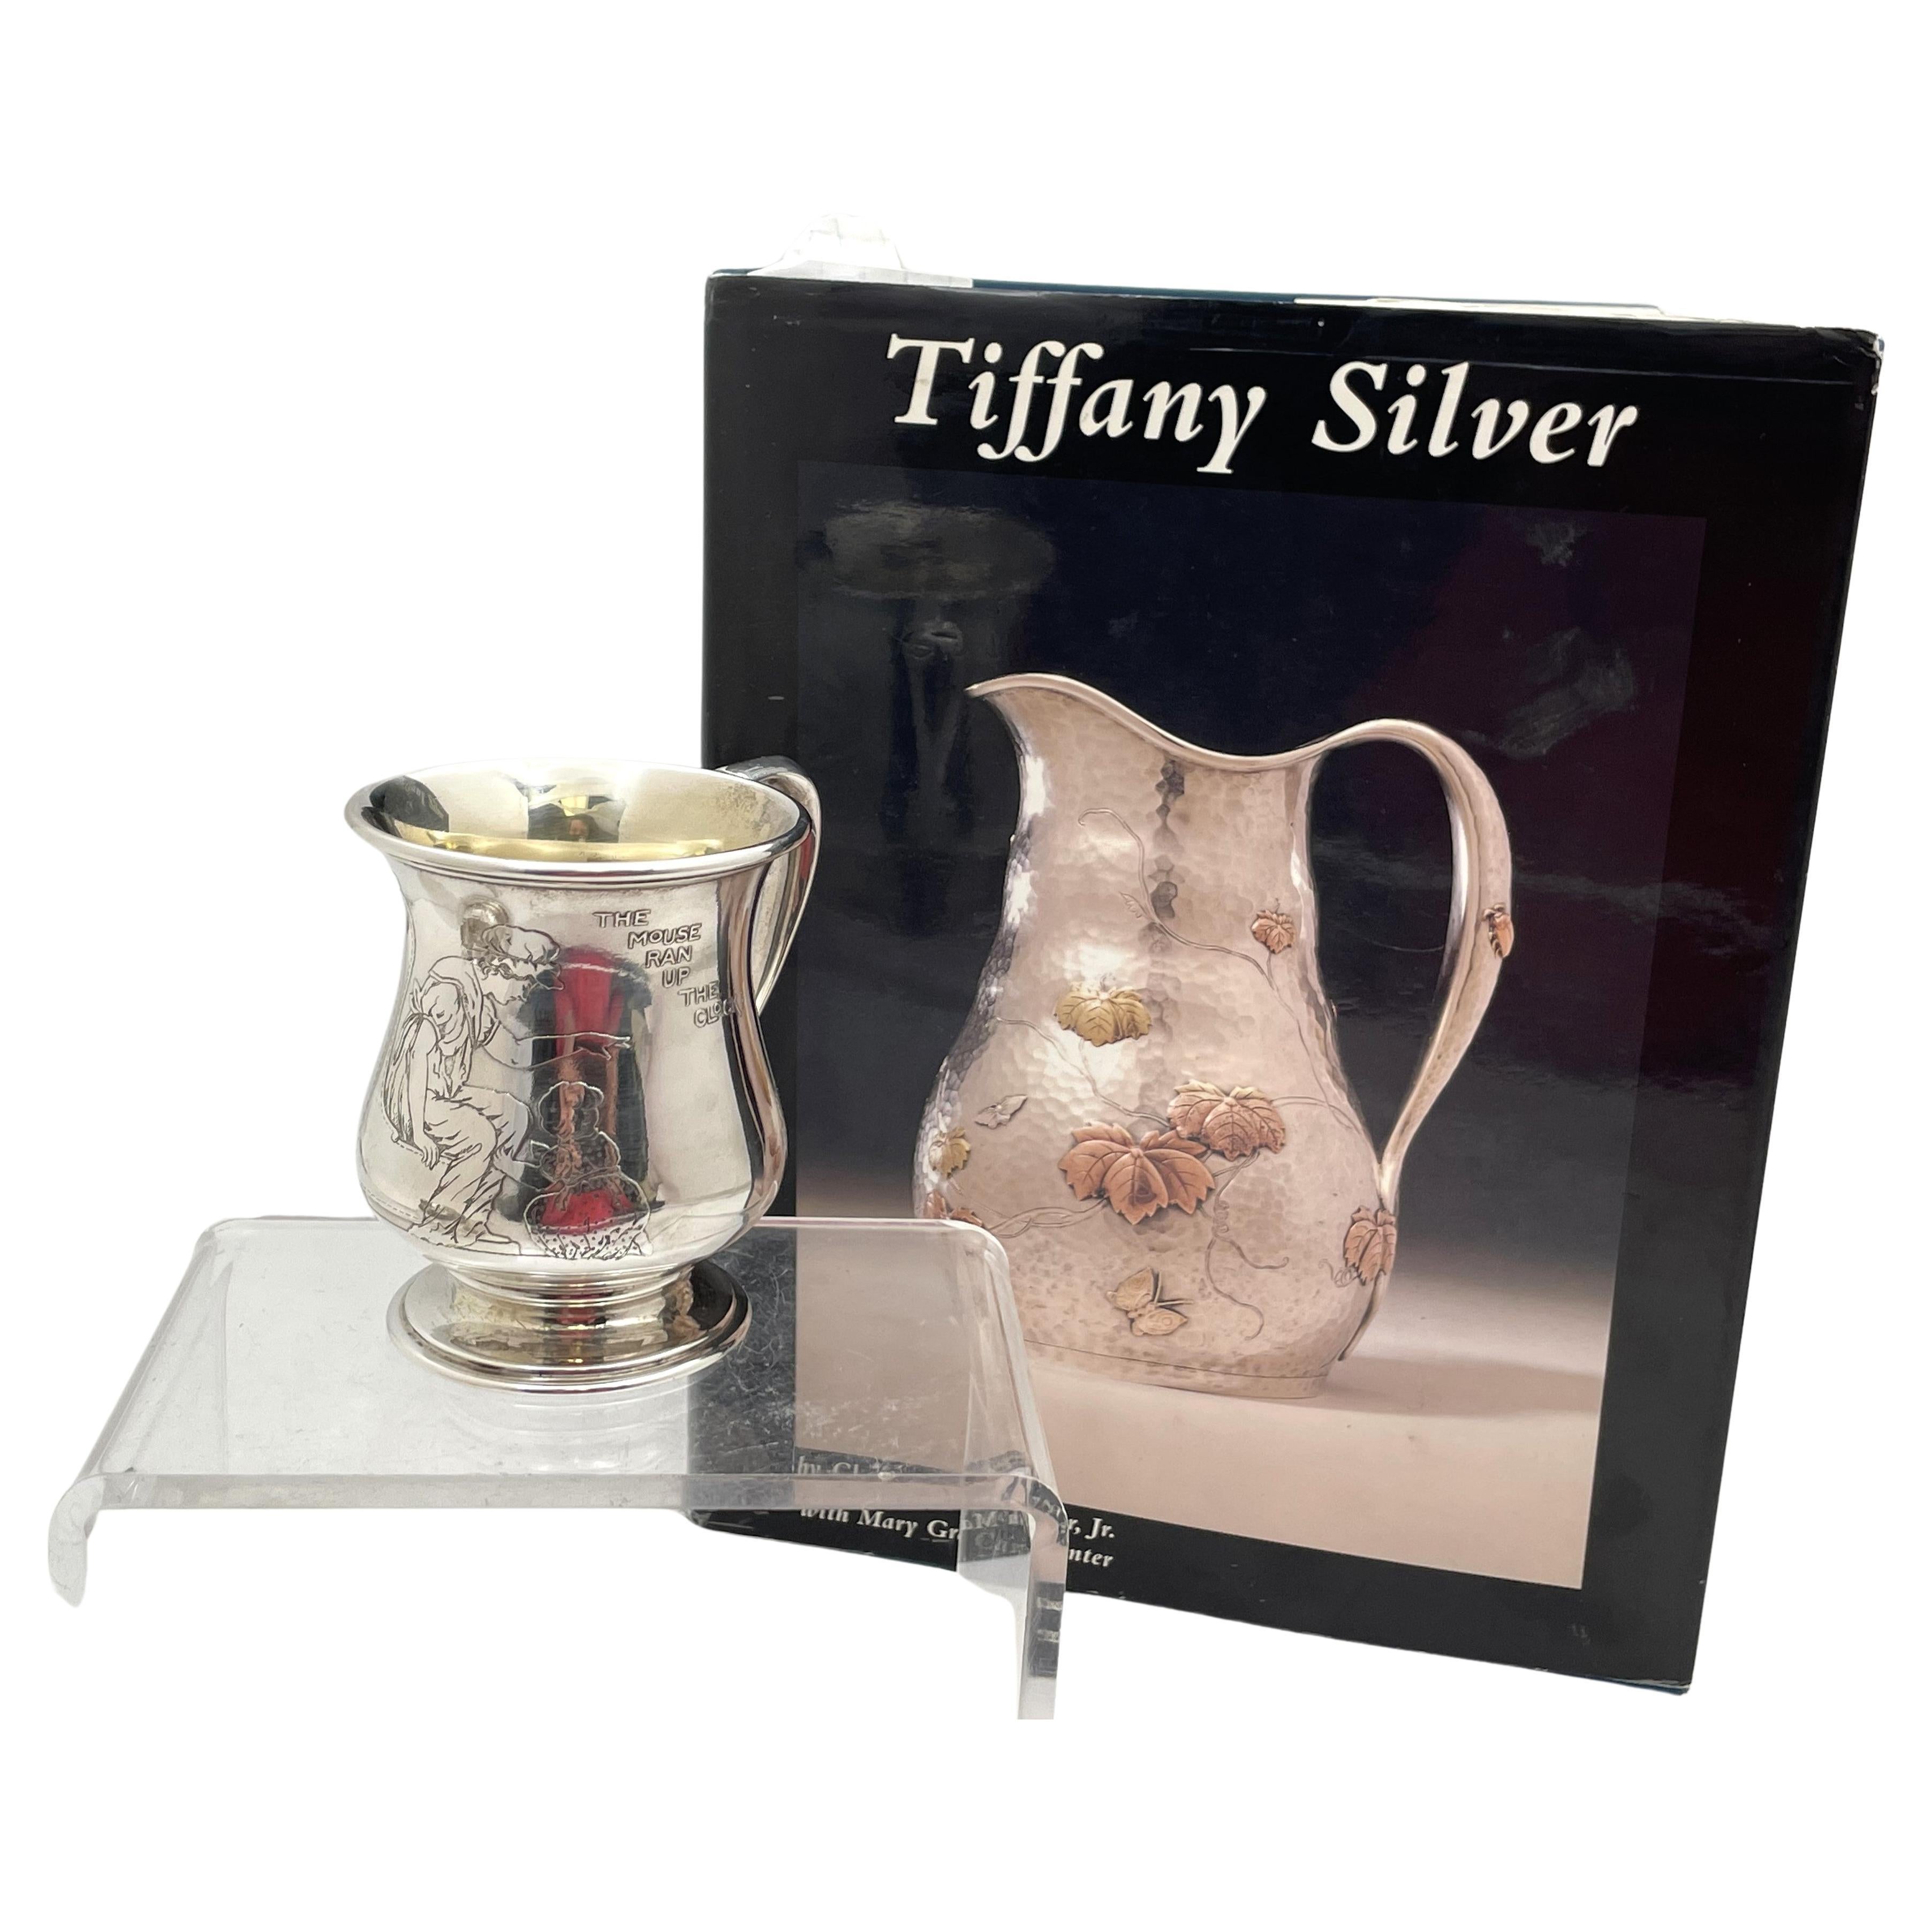 Tiffany & Co. Sterlingsilber-Kinderbecher aus Sterlingsilber, 1908, „The Mouse Ran Up the Clock“ im Angebot